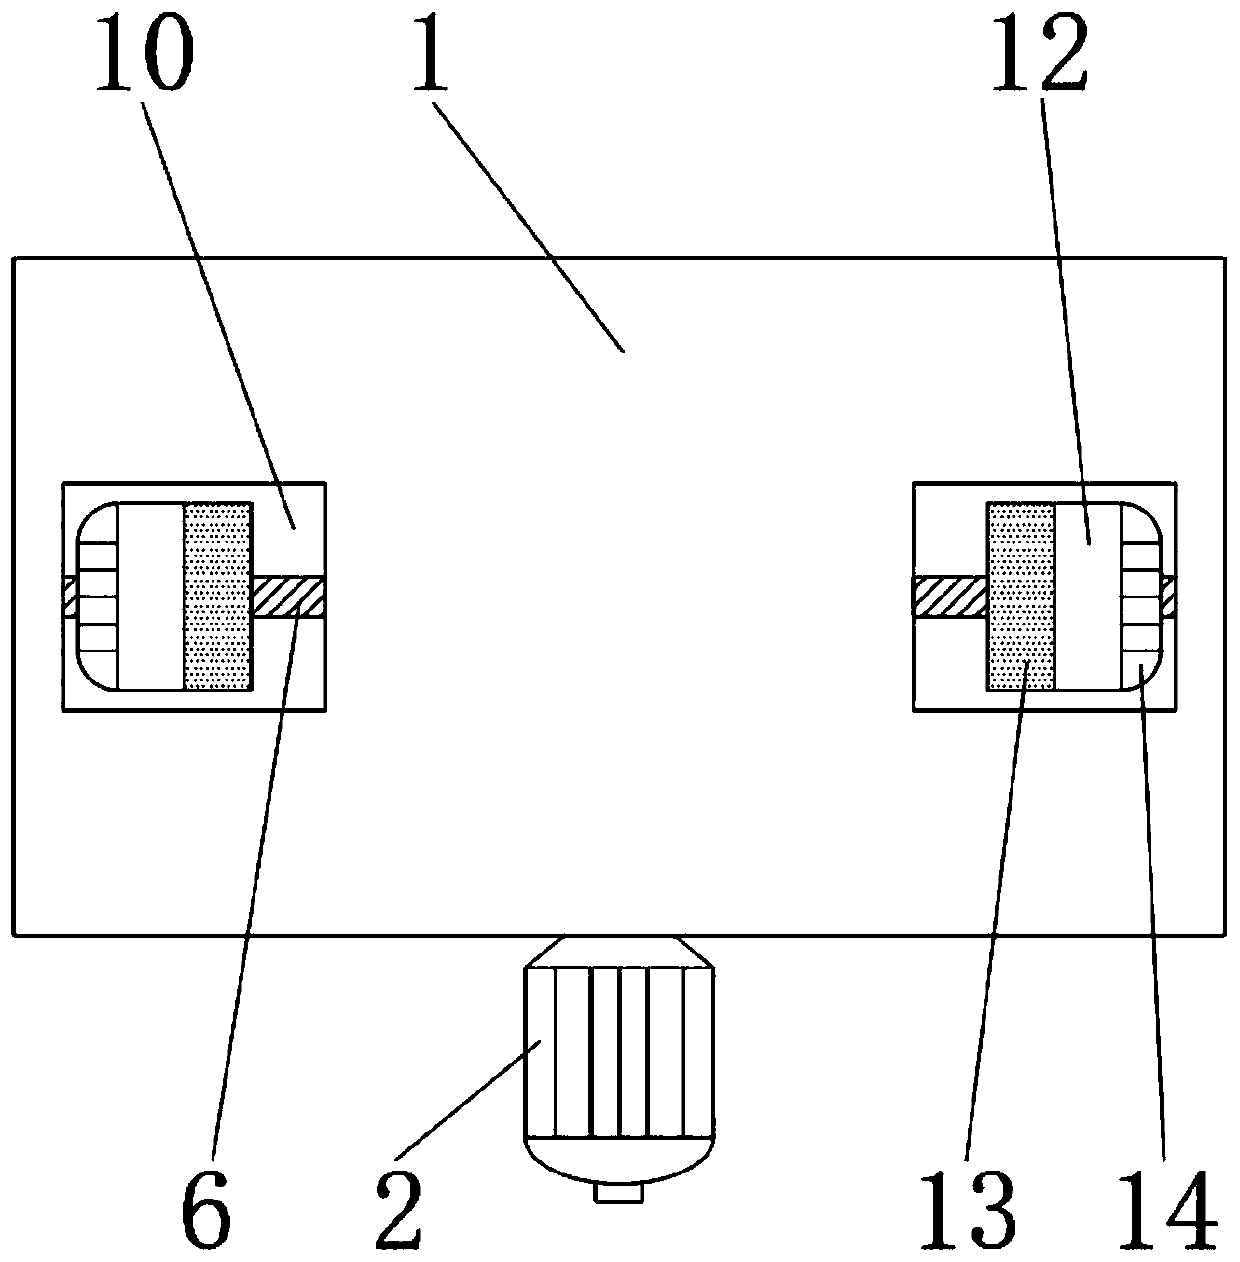 Vehicle locking structure of three-dimensional parking equipment